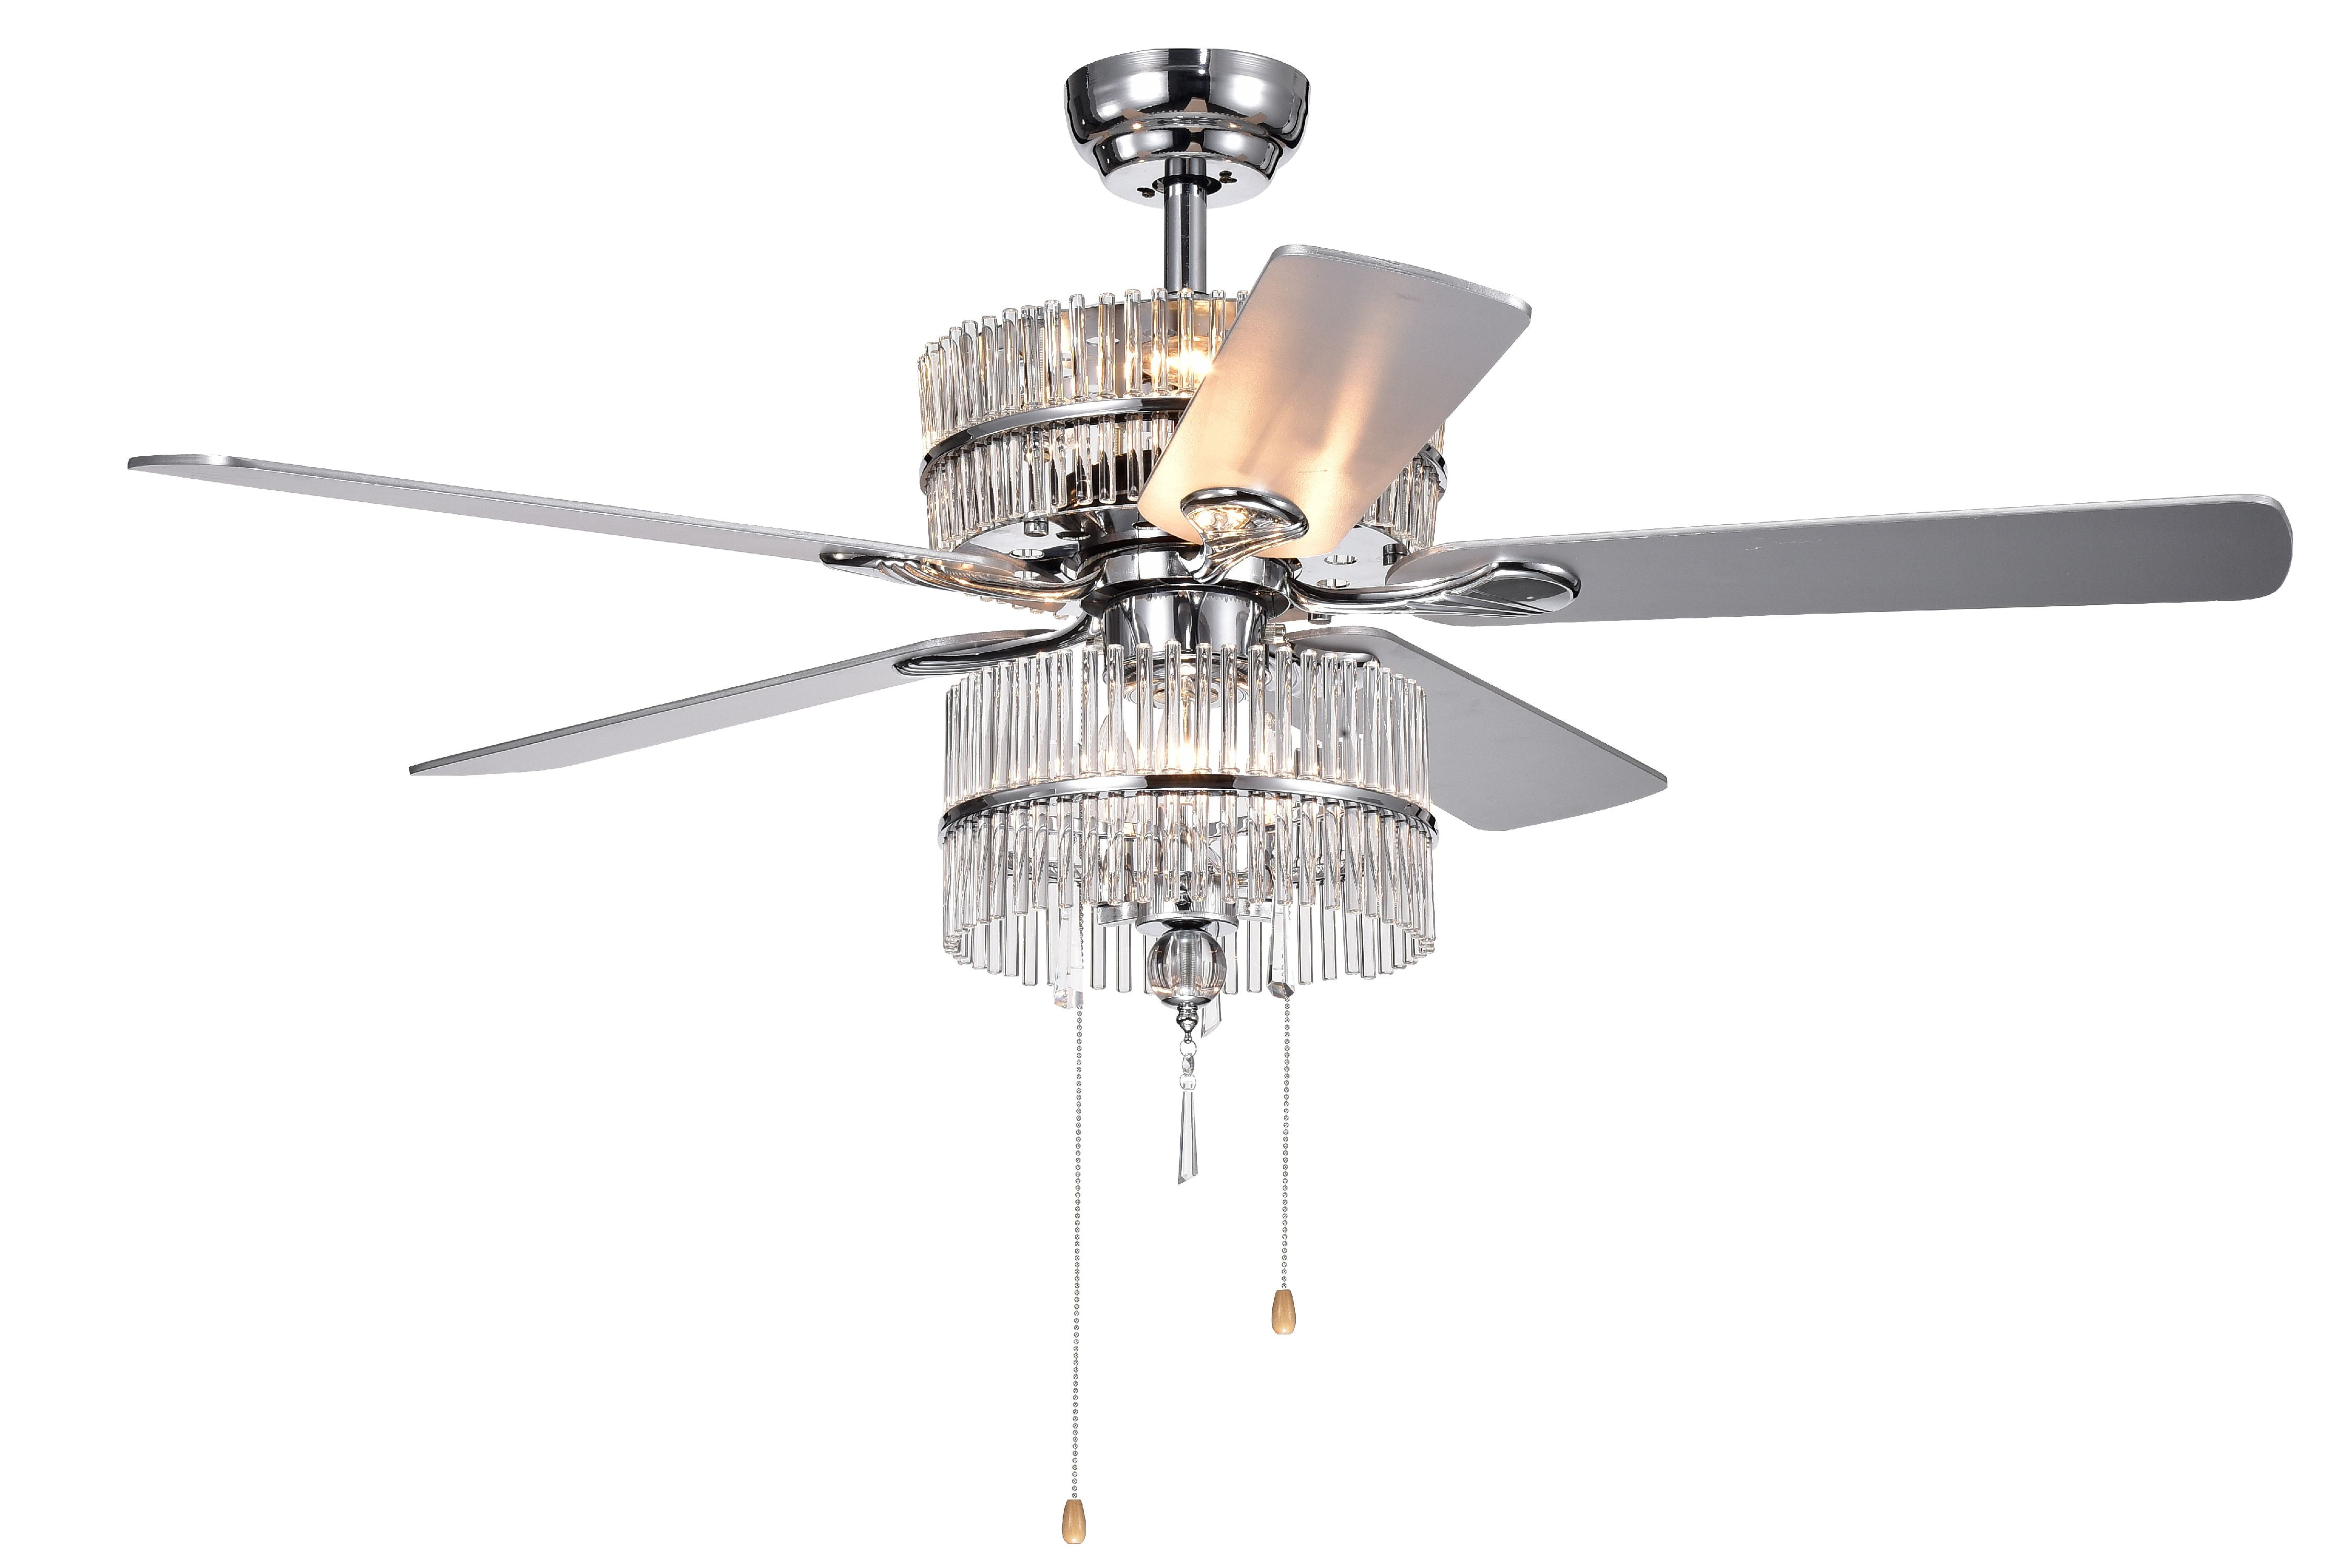 Wyllow 6-light Crystal 5-blade 52-inch Chrome Ceiling Fan (Optional Remote & 2 Color Option Blades)